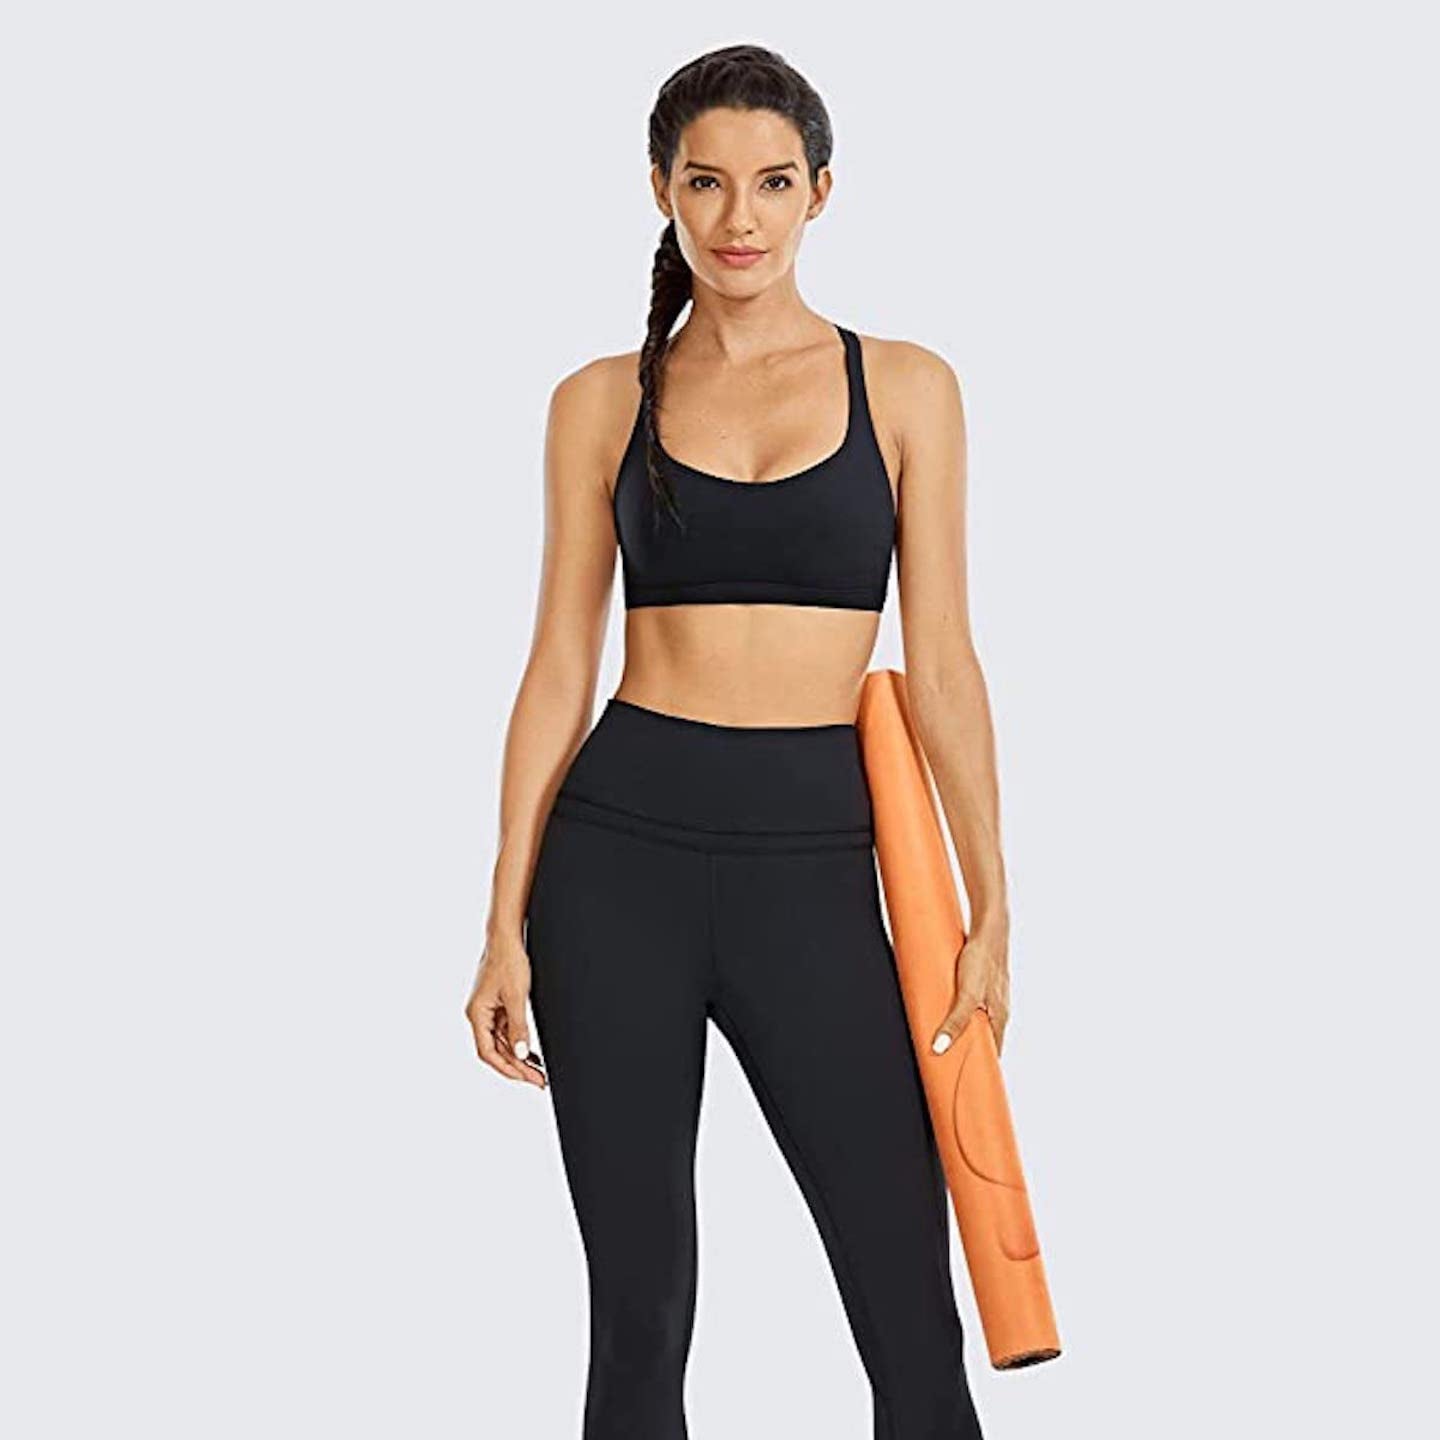 The Best Leggings With 5-Star Reviews on